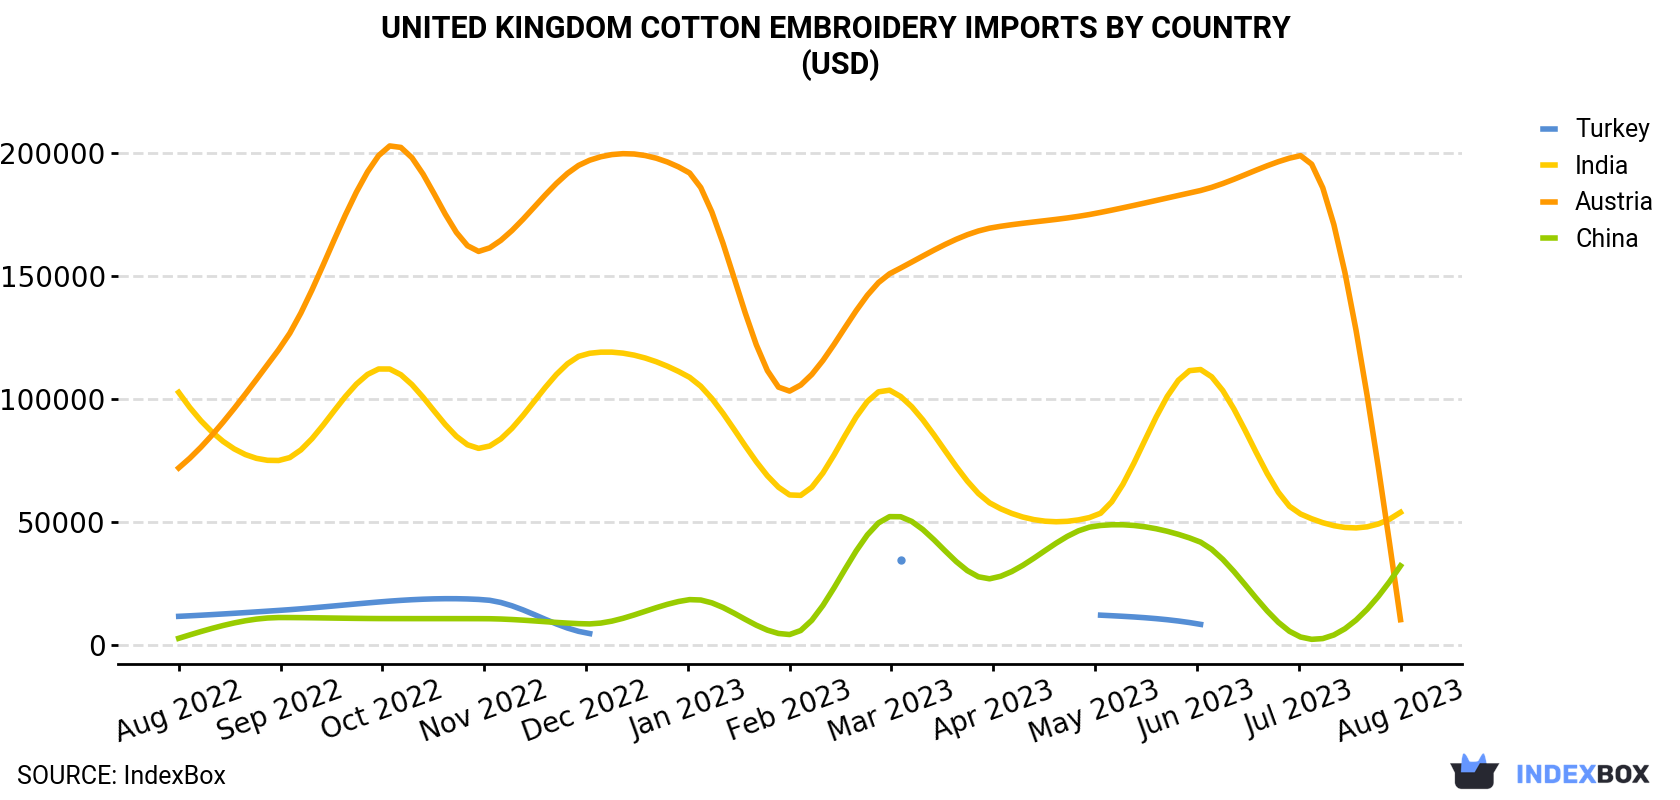 United Kingdom Cotton Embroidery Imports By Country (USD)